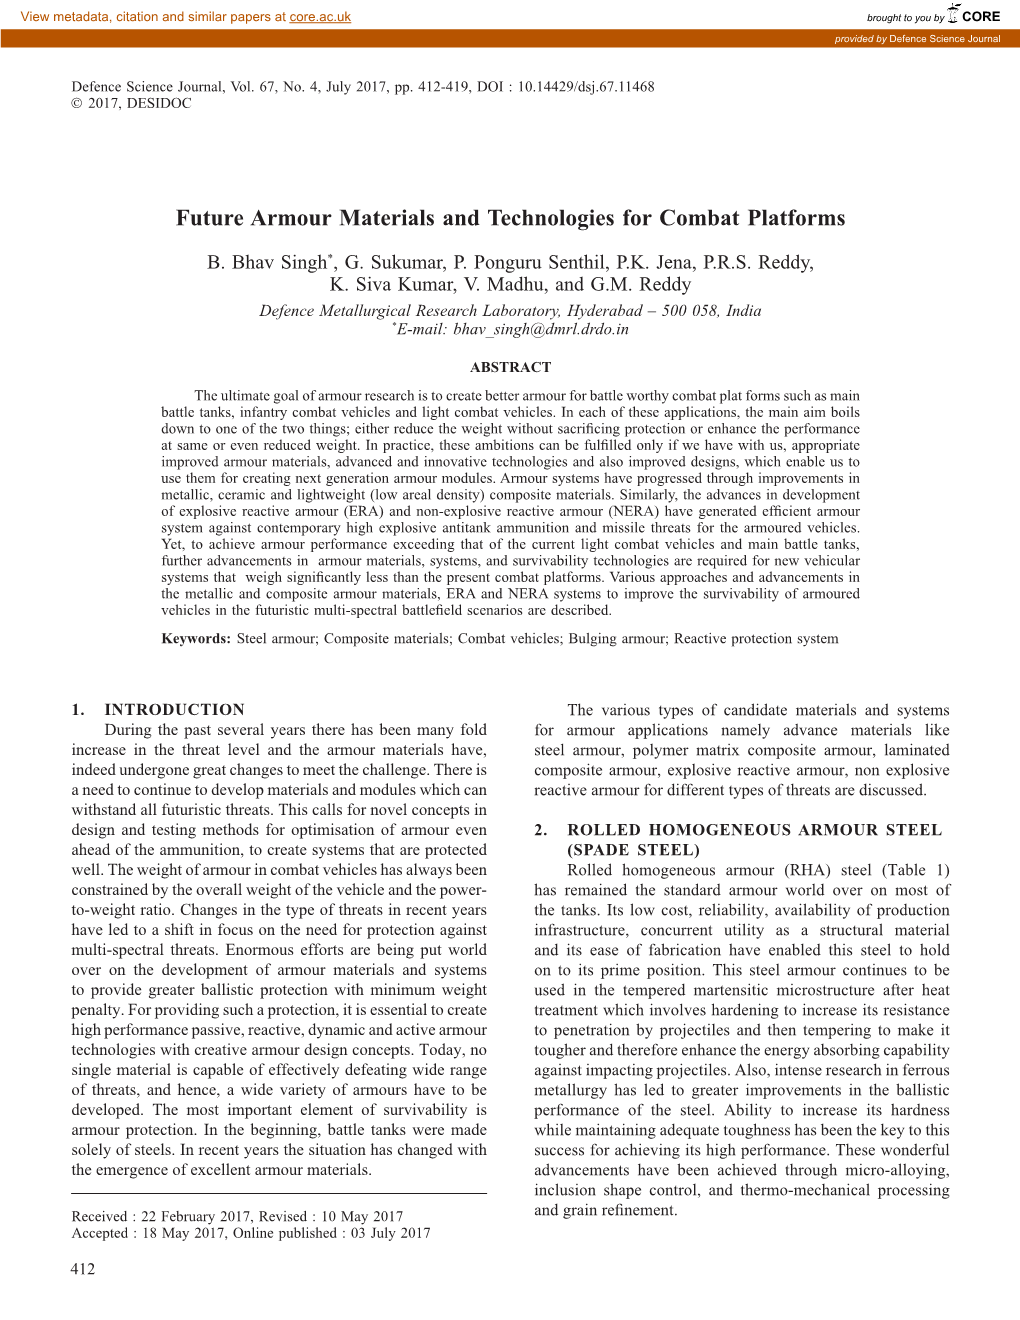 Future Armour Materials and Technologies for Combat Platforms